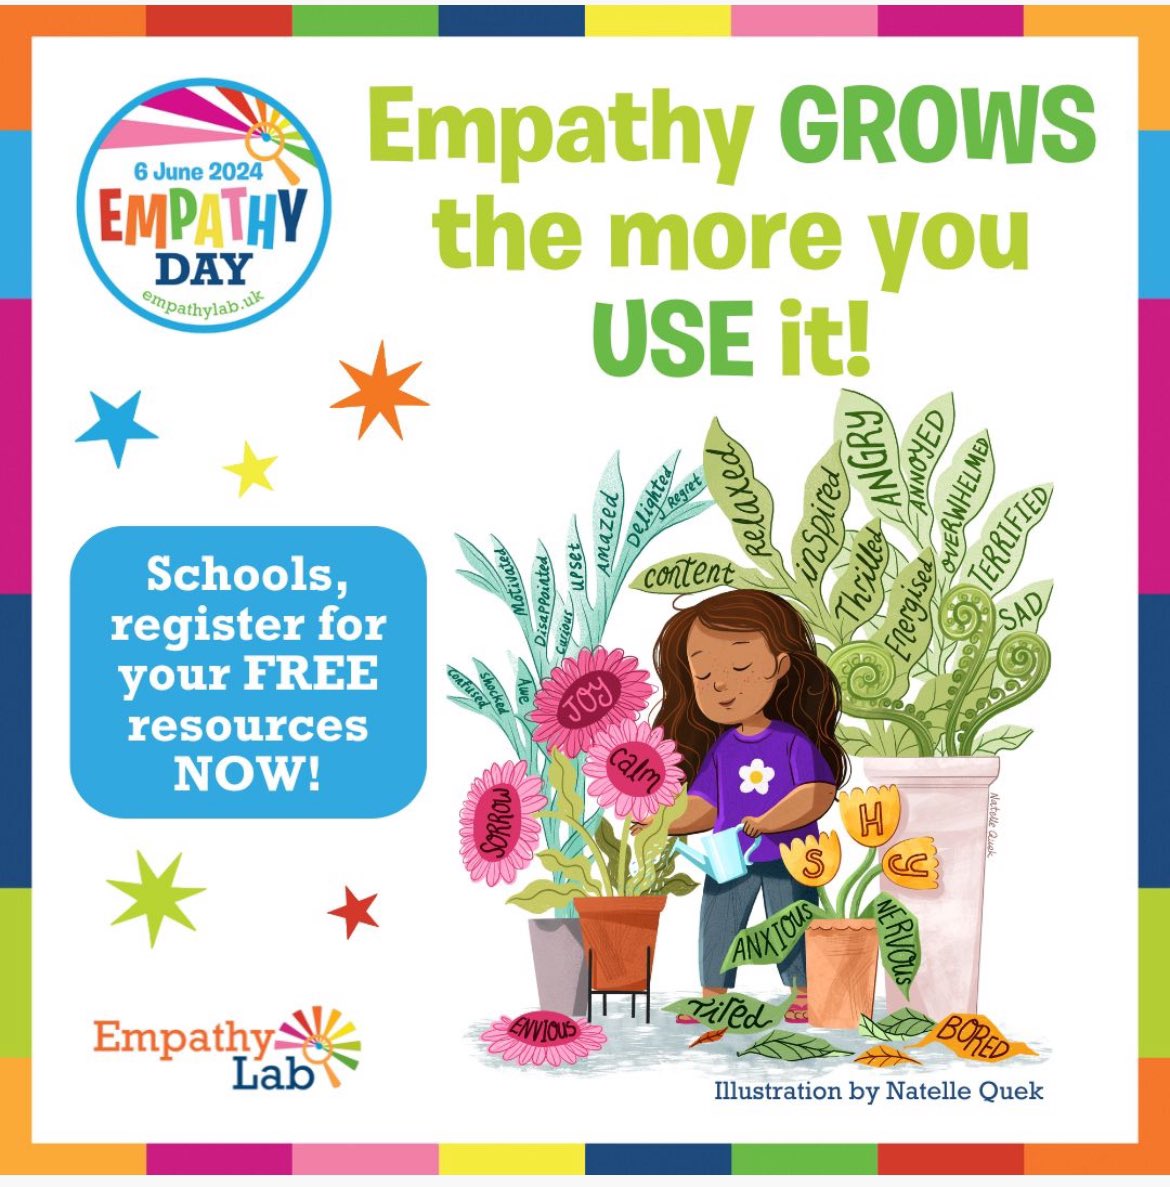 Do get involved in Empathy Day! surveyhero.com/c/p9w4nbtn Free resources to support you 👏👏@EmpathyLabUK @WSHEnglishHub @one_to_read @Teacherglitter Nurturing connections and social action in the world 👏👏📚@MirandaMcK